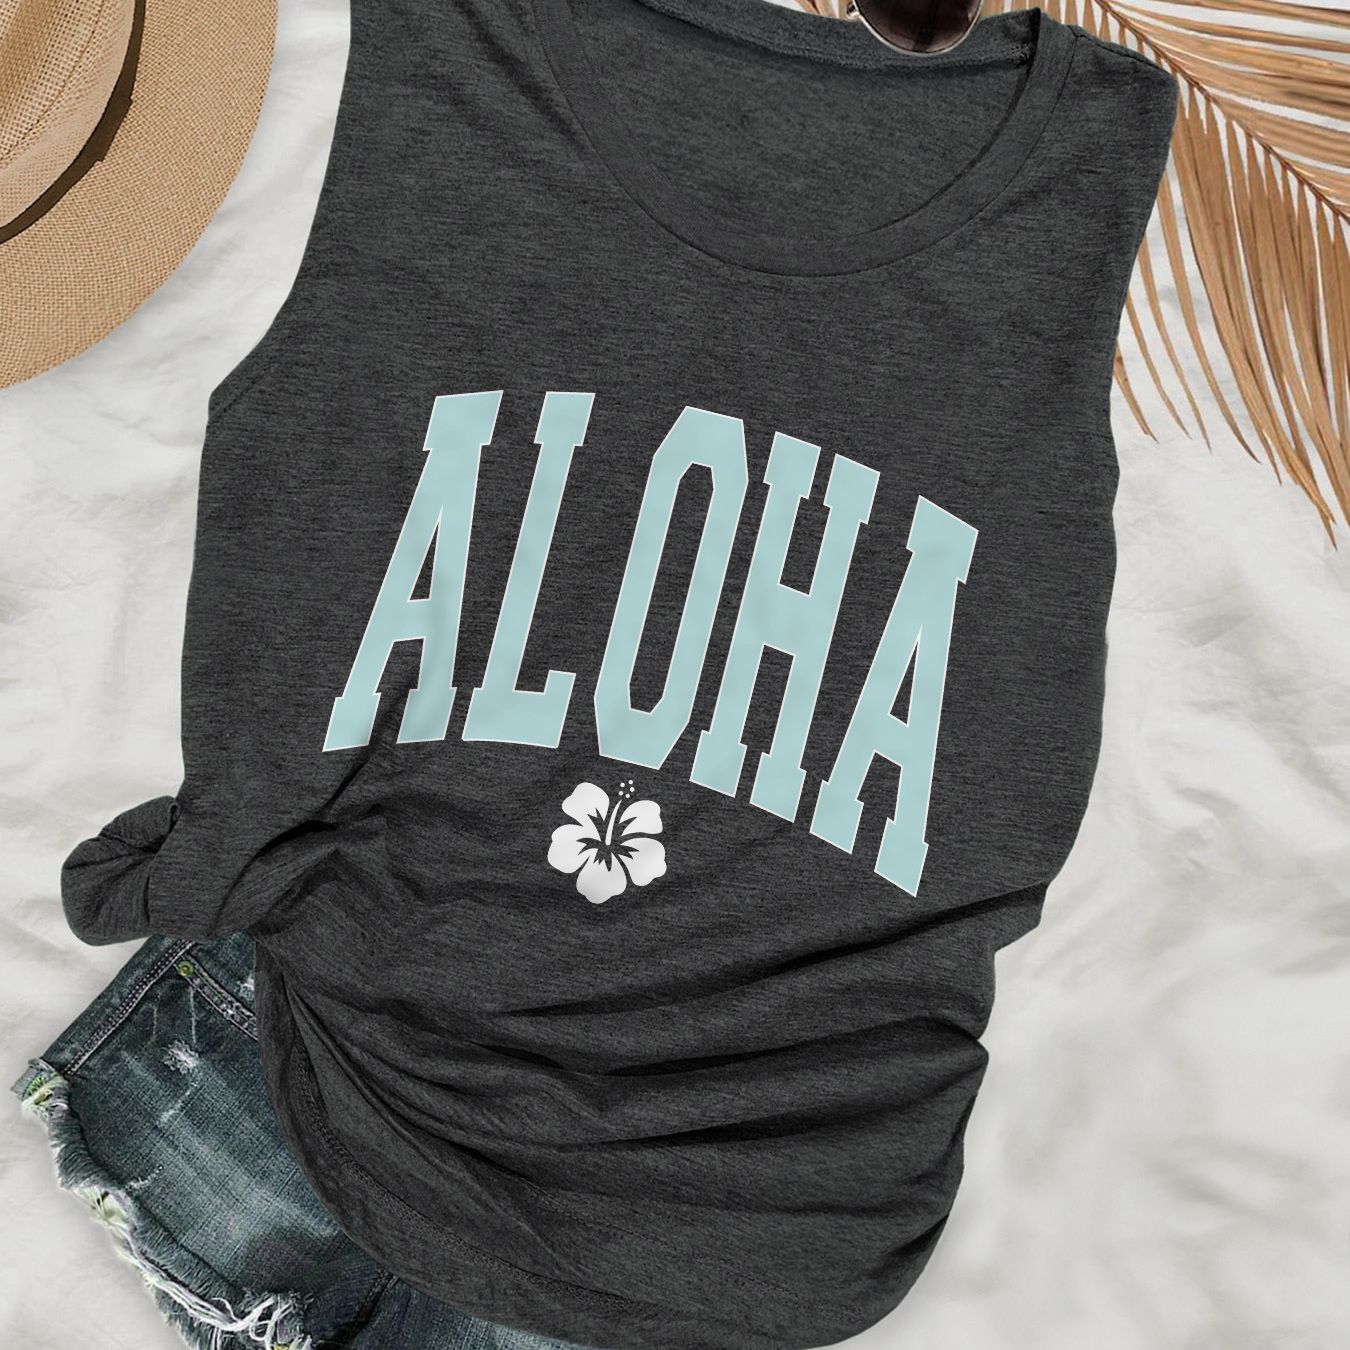 

Aloha Print Tank Top, Sleeveless Casual Top For Summer & Spring, Women's Clothing